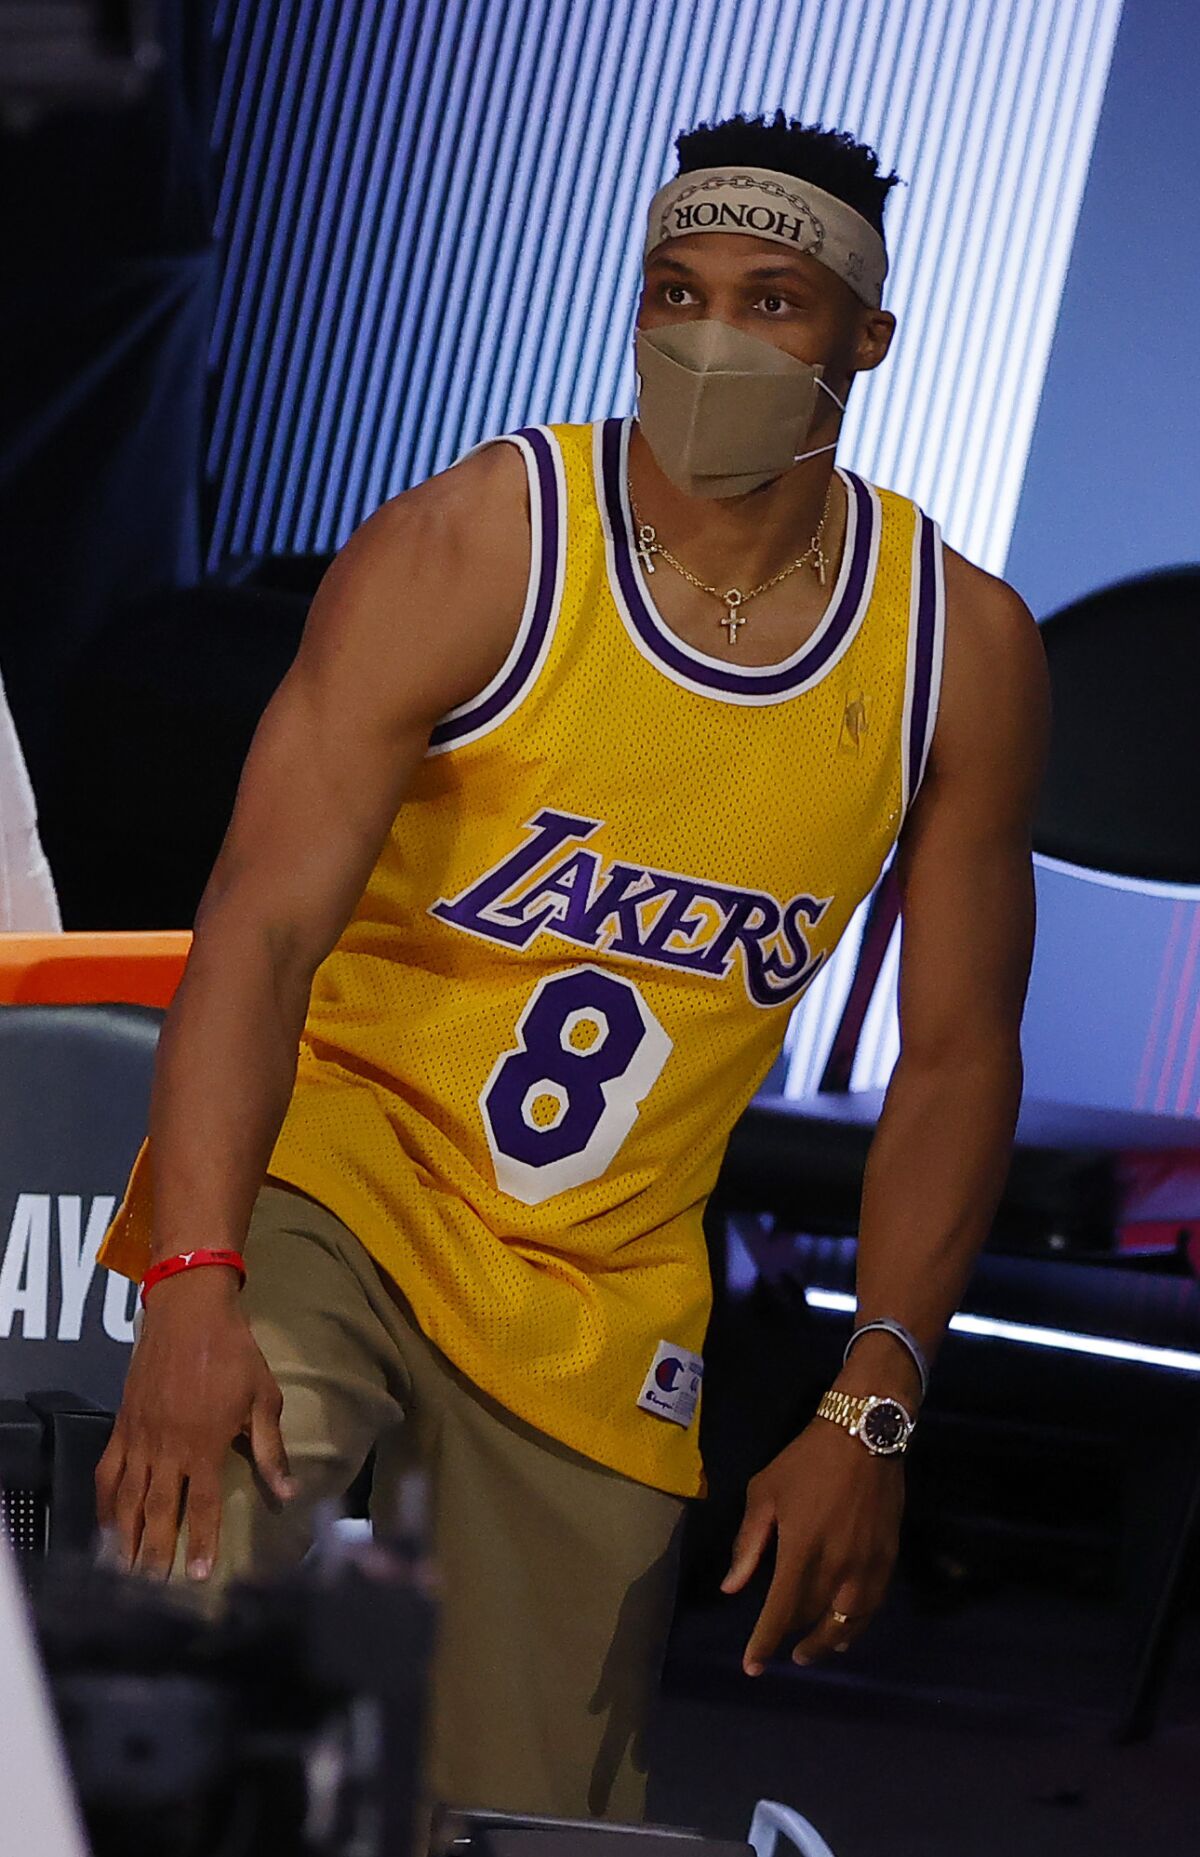 Russell Westbrook wears a Kobe Bryant jersey during a playoff game with the Rockets in 2020.